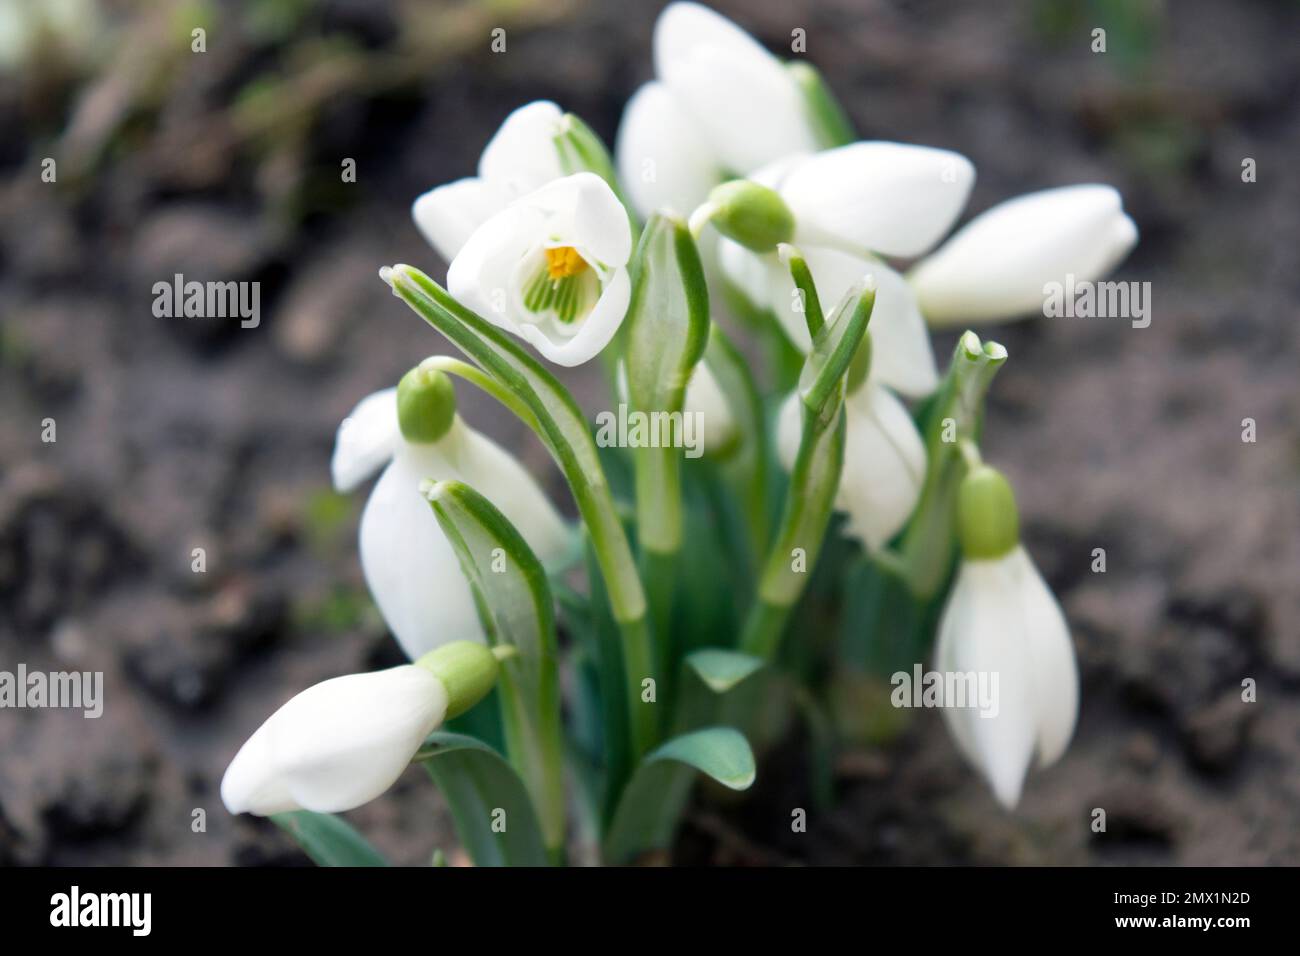 Fragile snowdrops, a widely cultivated bulbous European plant that bears drooping white flowers during the late winter. Stock Photo